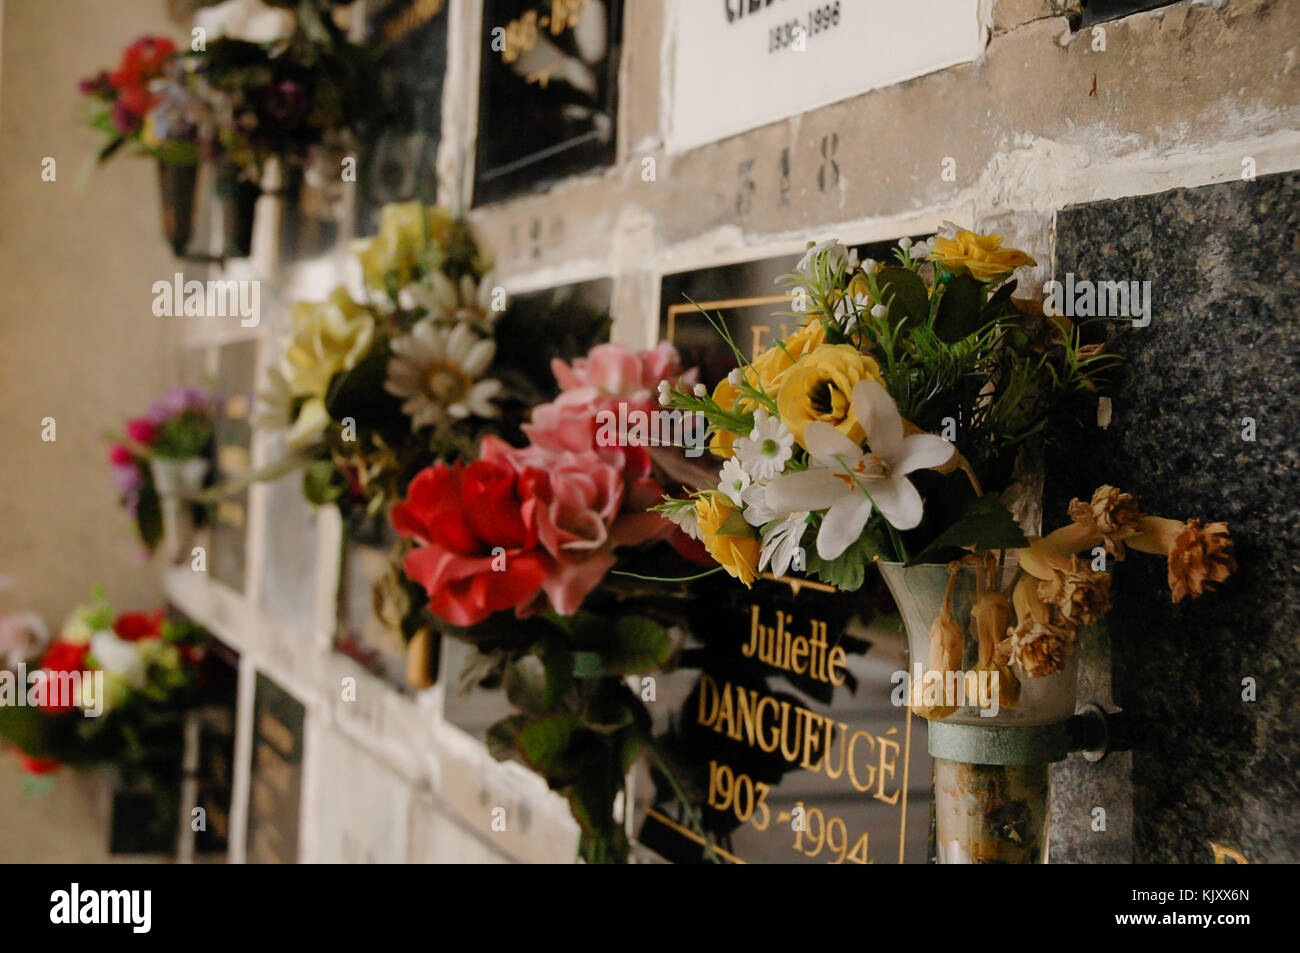 Nameplates over the cinerary urns at the Columbarium in the Père Lachaise Cemetery, Paris, France. Stock Photo